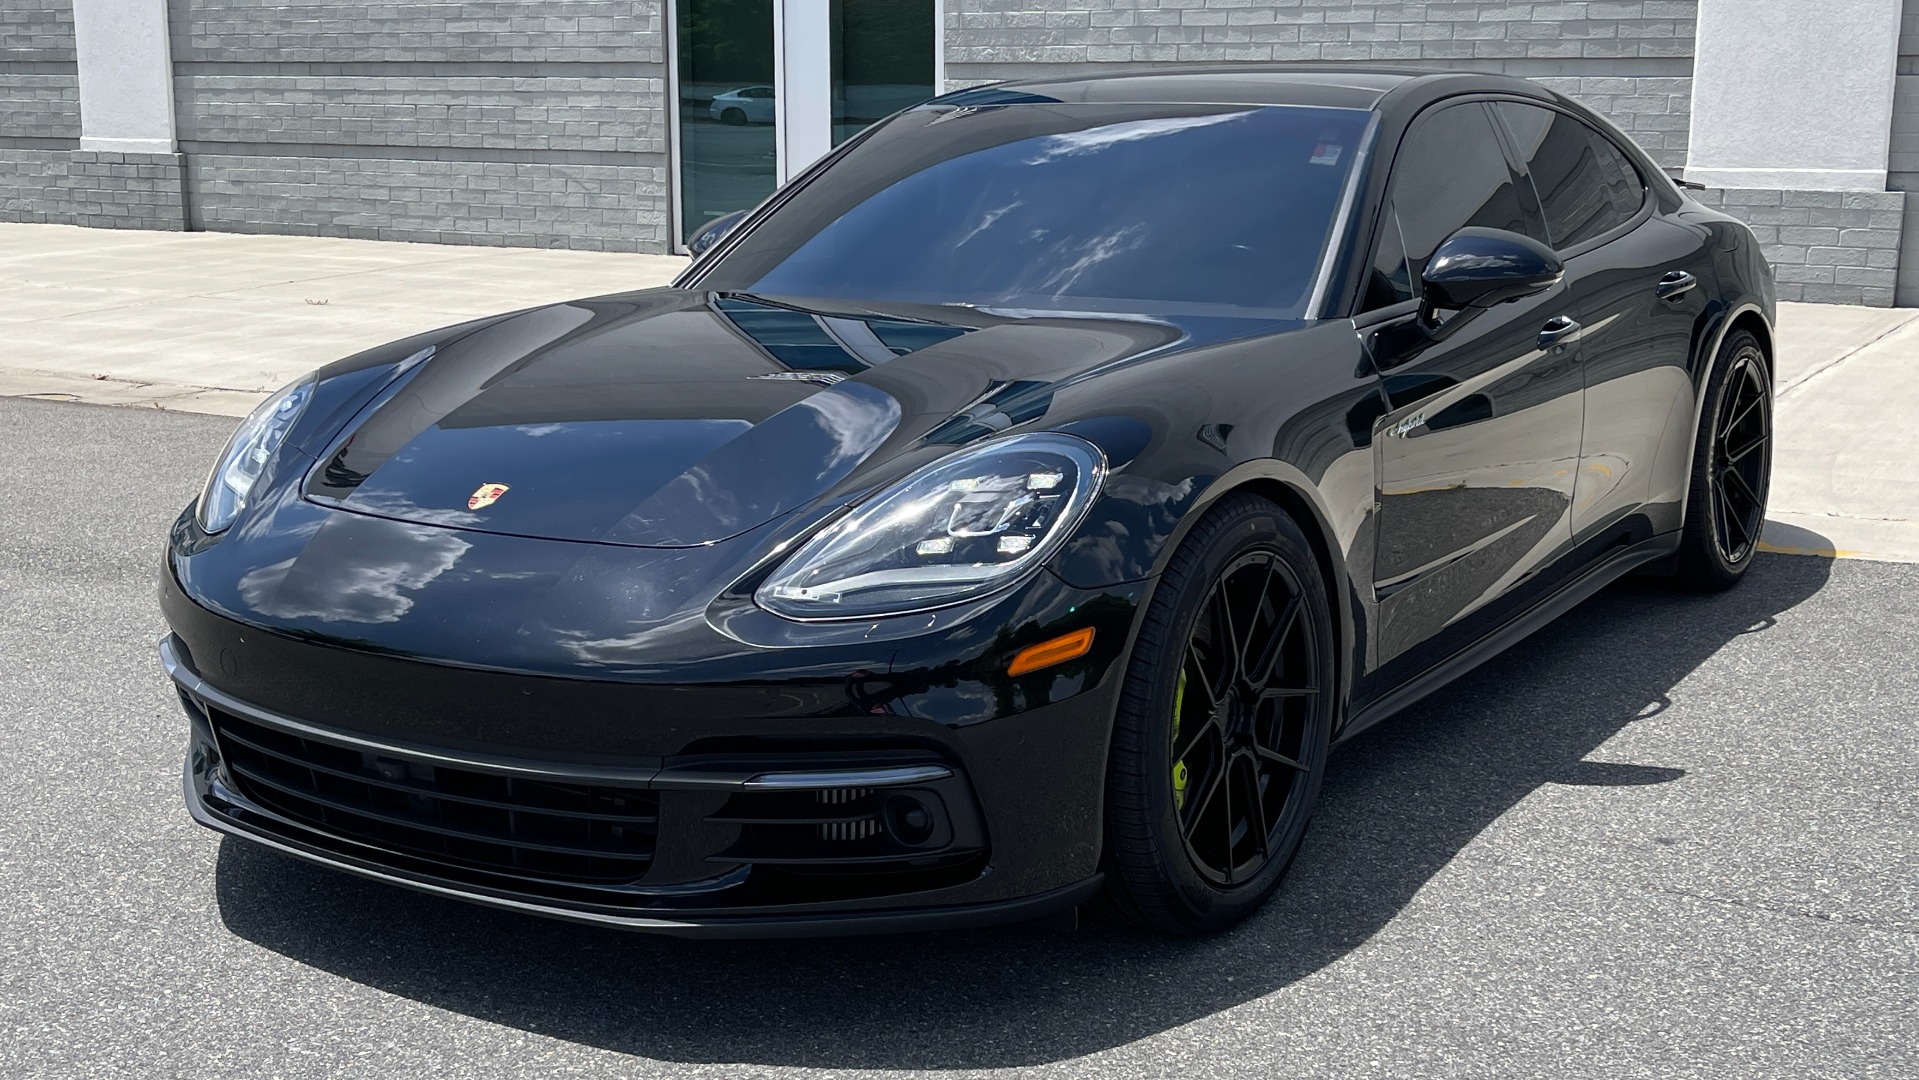 Used 2018 Porsche Panamera 4 E-Hybrid for sale $52,000 at Formula Imports in Charlotte NC 28227 5